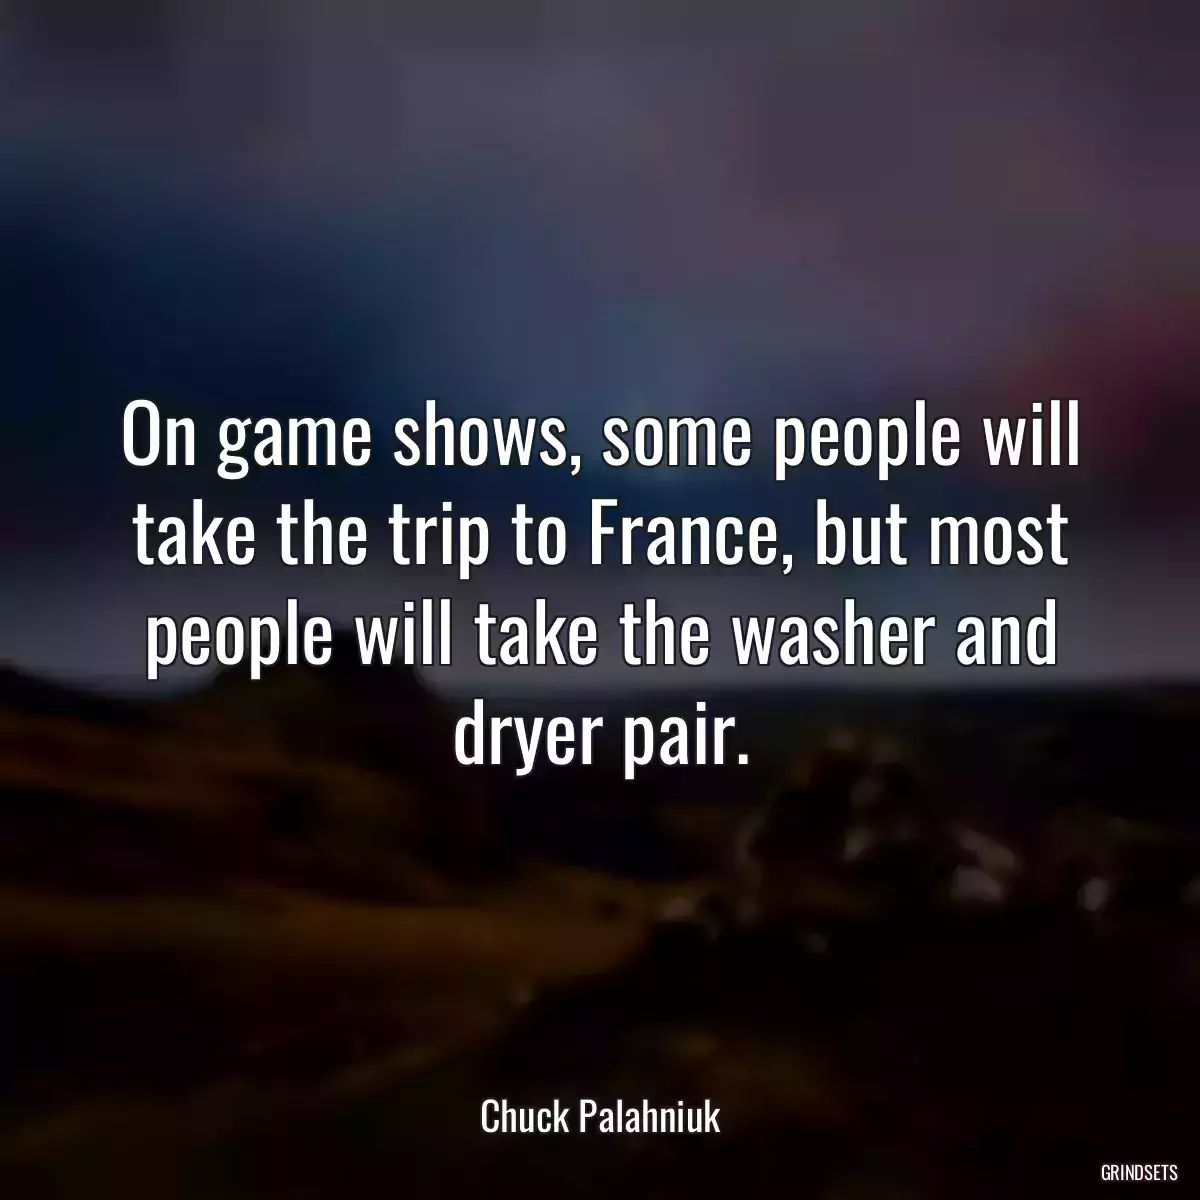 On game shows, some people will take the trip to France, but most people will take the washer and dryer pair.